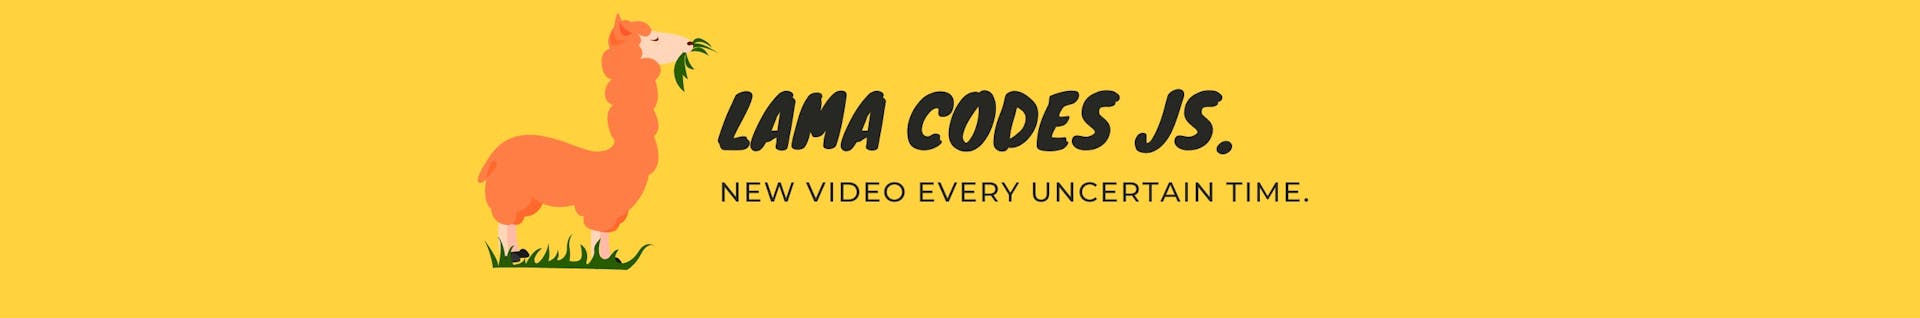 Lama Dev YouTube channel cover image